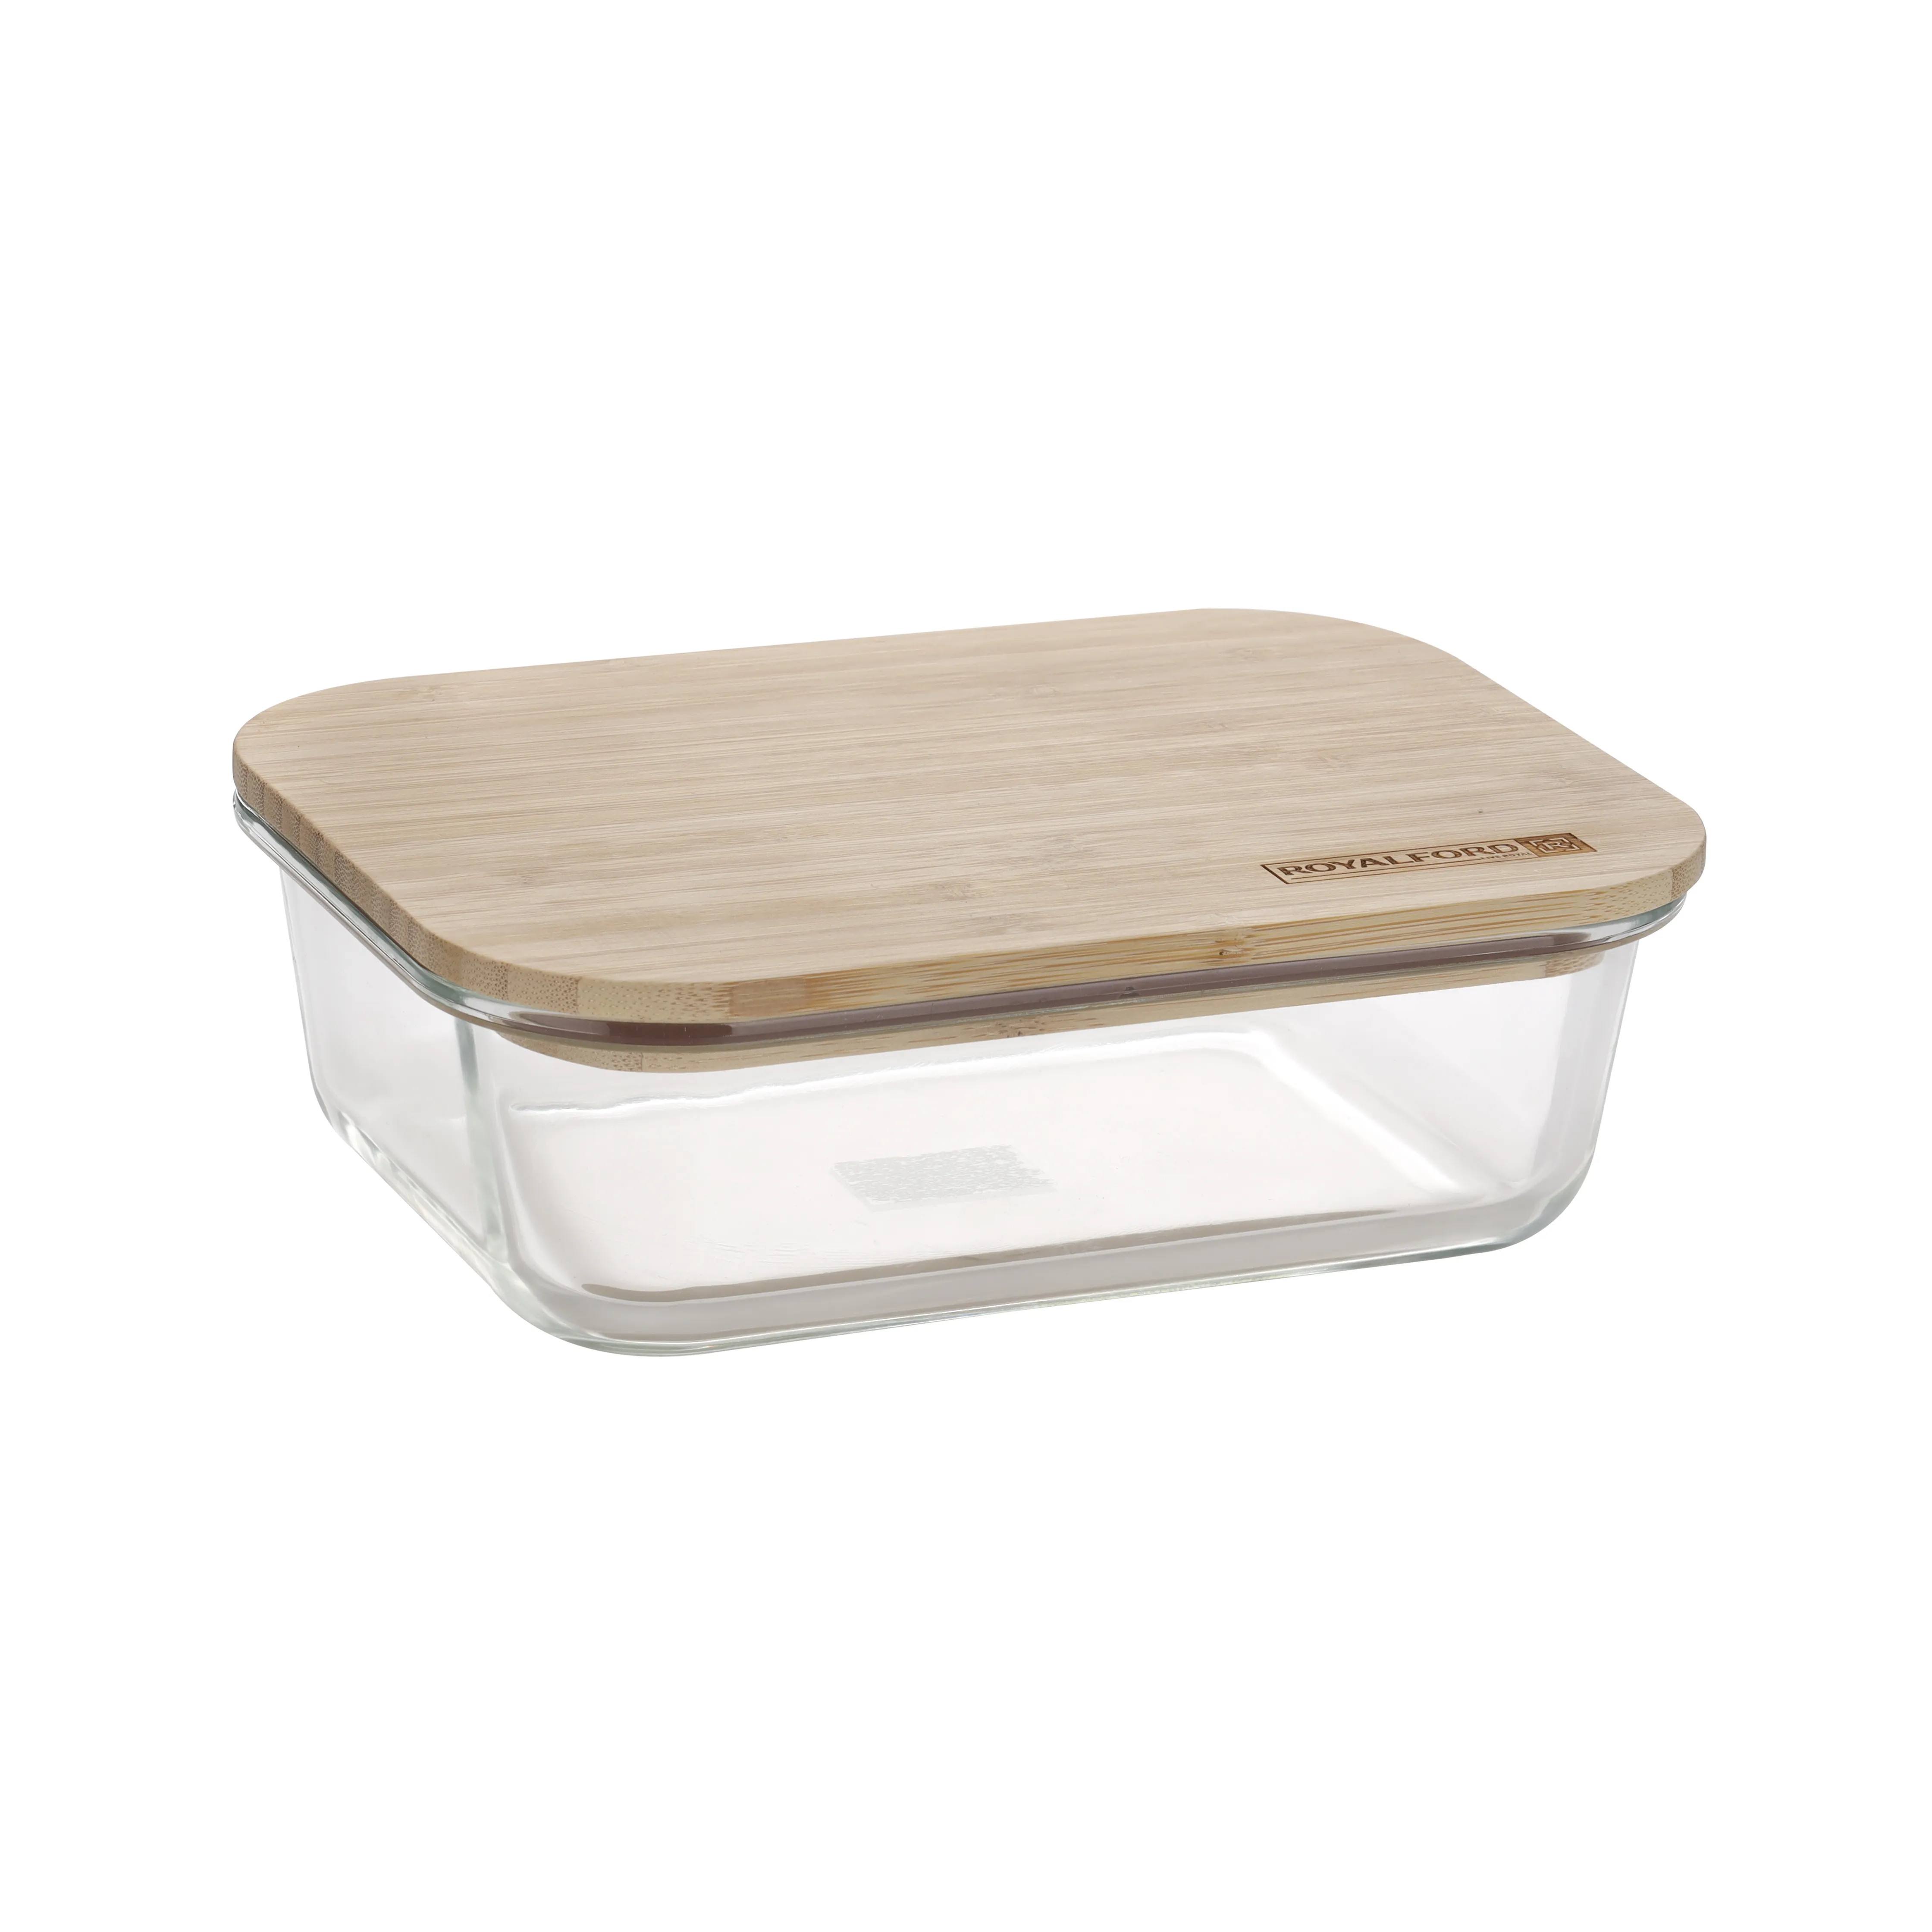 Royalford Rectangular Glass Food Container with Bamboo Lid, RF10321 - 1520ml Capacity, Freezer & Dishwasher Safe, Air Tight Lid with Silicone Sealing Ring, High Thermal Shock Resistant